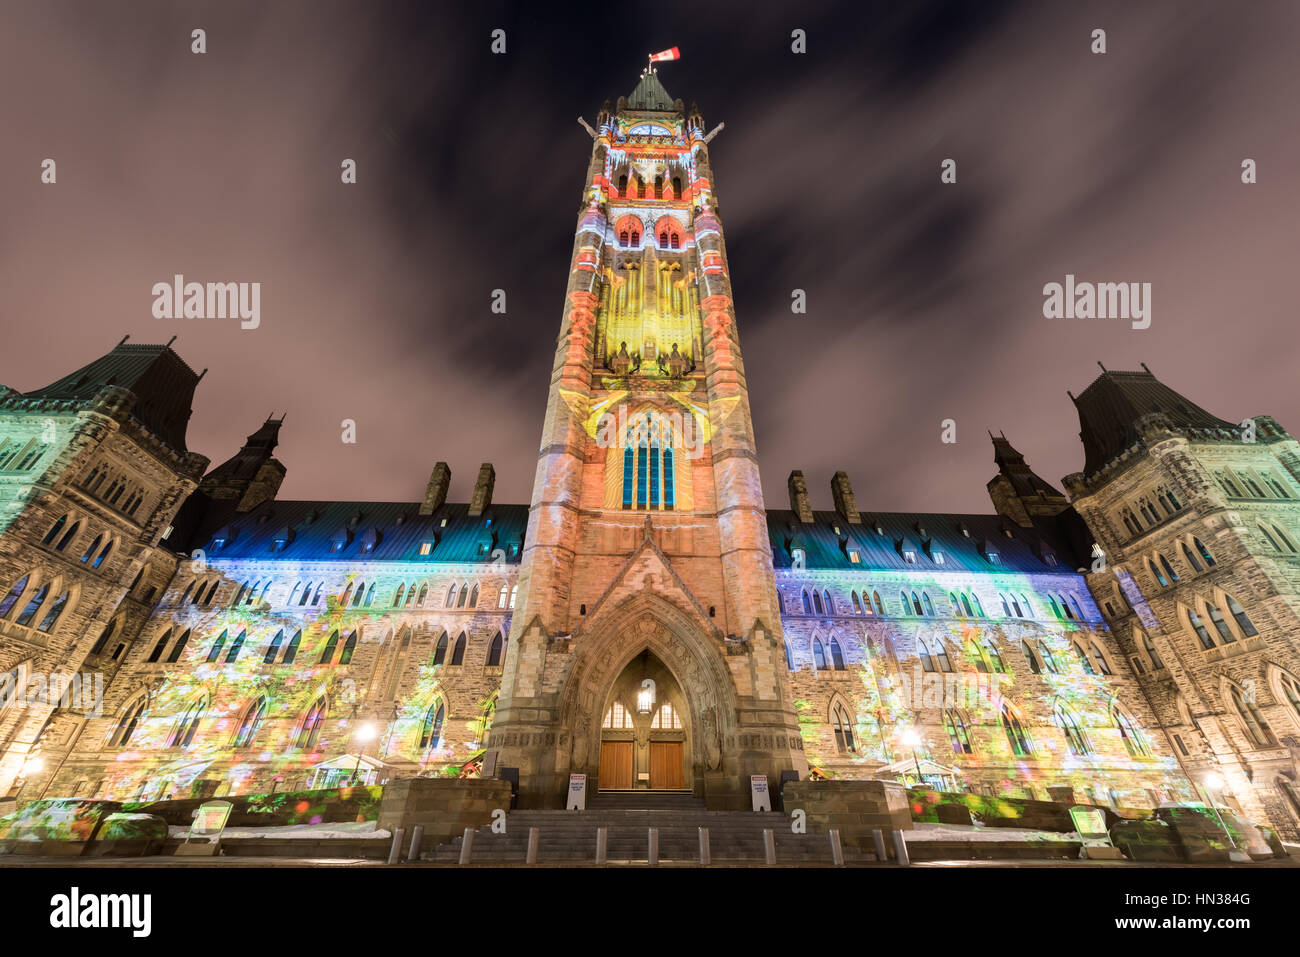 Winter holiday light show projected at night on the Canadian House of Parliament to celebrate the 150th Anniversary of Confederation of Canada Stock Photo